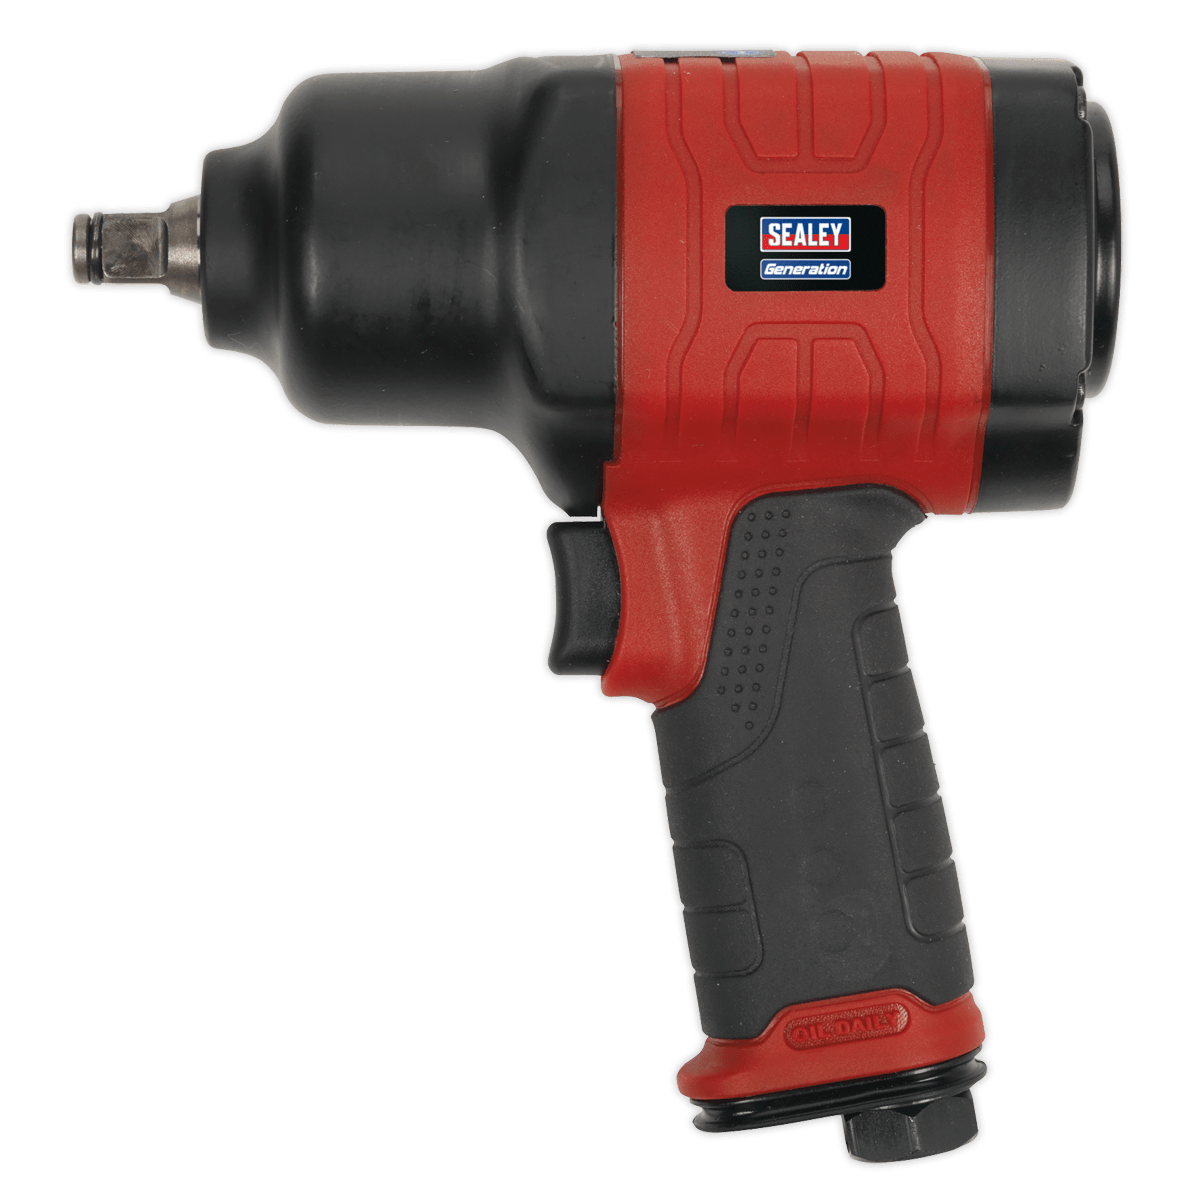 Composite Air Impact Wrench 1/2"Sq Drive - Twin Hammer | Combination of composite materials, alloyed metals and twin hammer design result in a lightweight, durable and powerful air impact wrench. | toolforce.ie